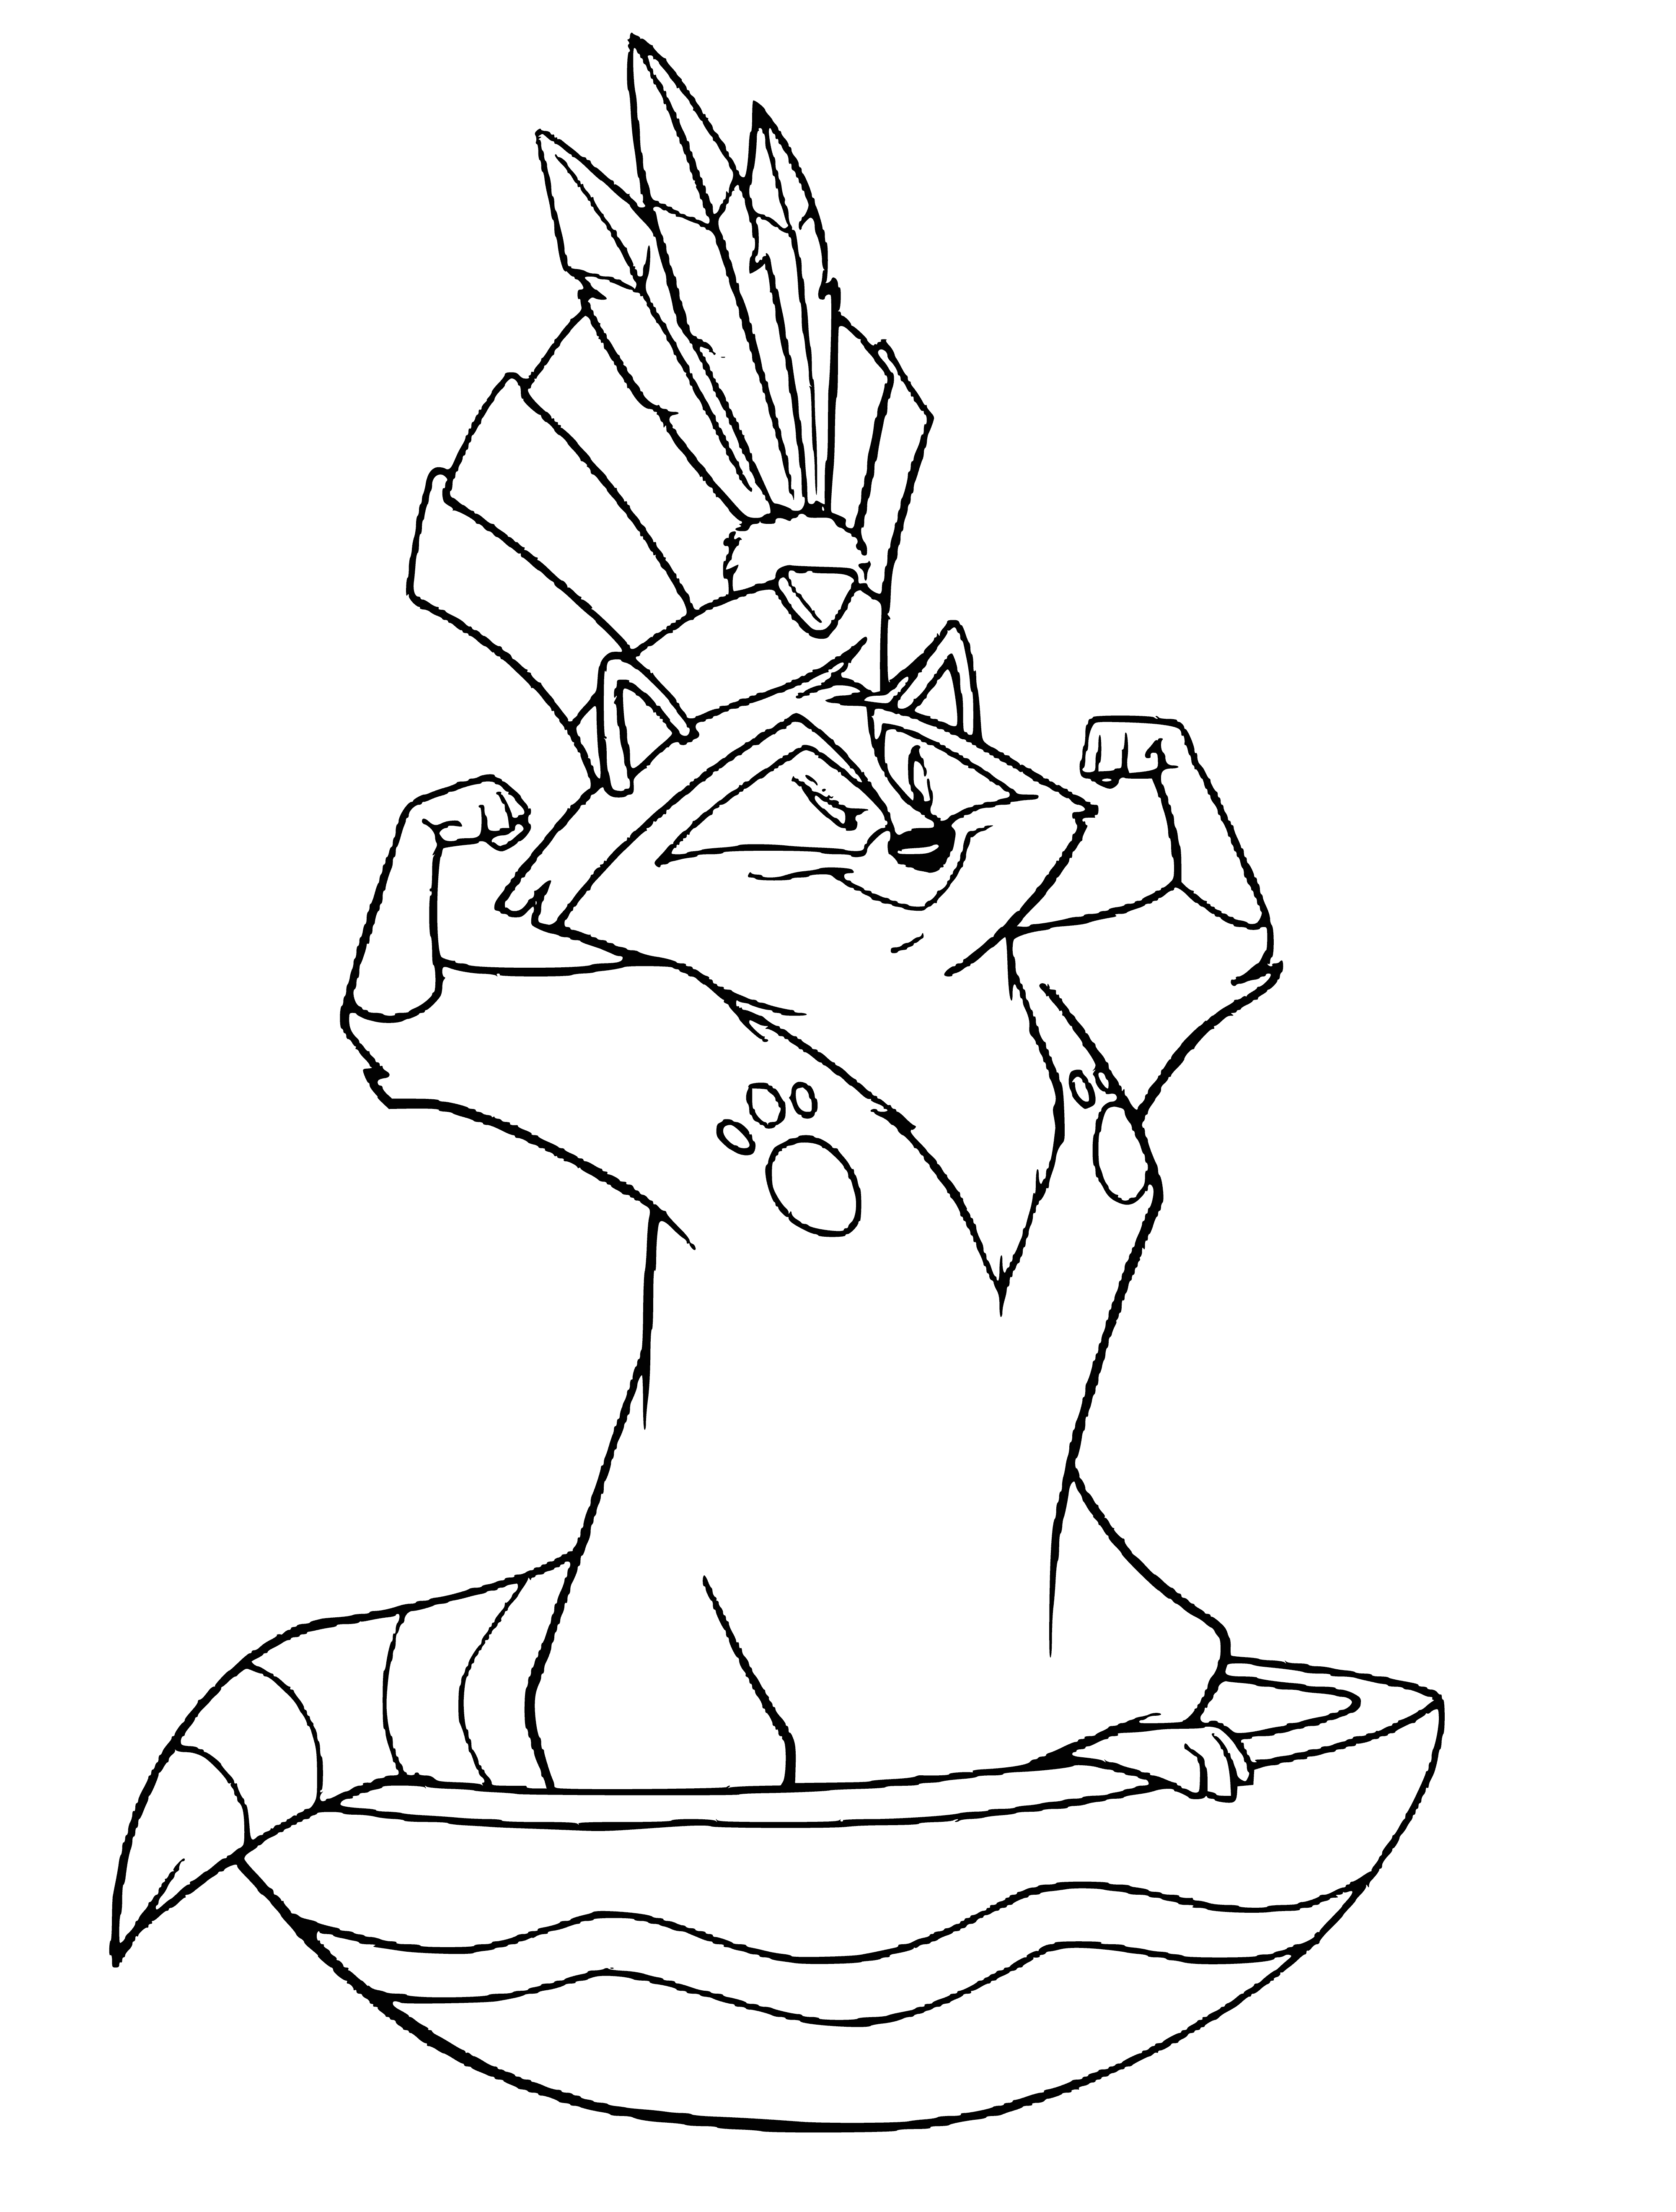 Enot Miko coloring page